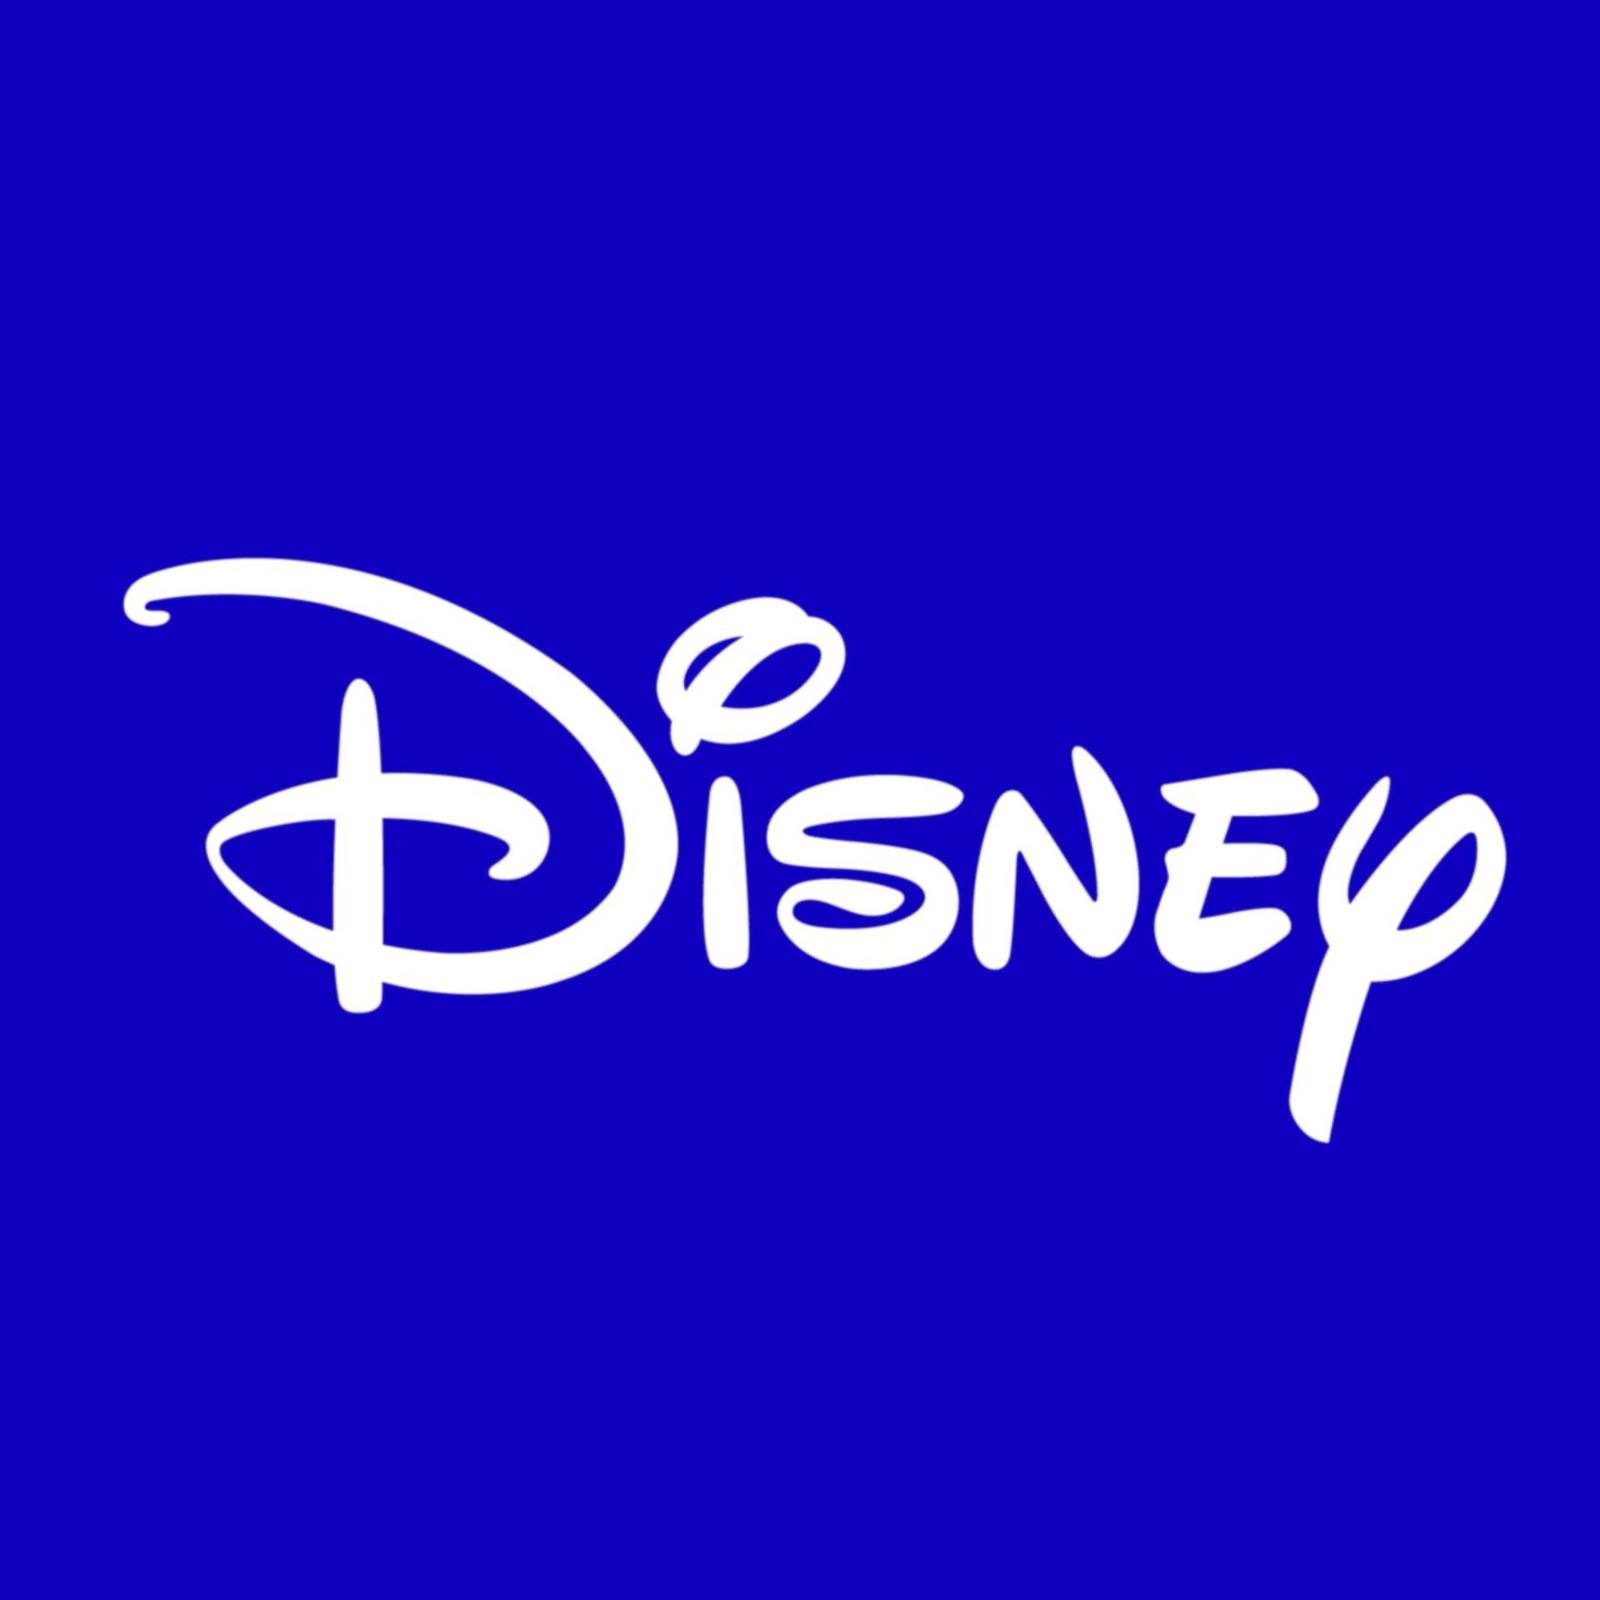 All the Disney announcements from December 2020